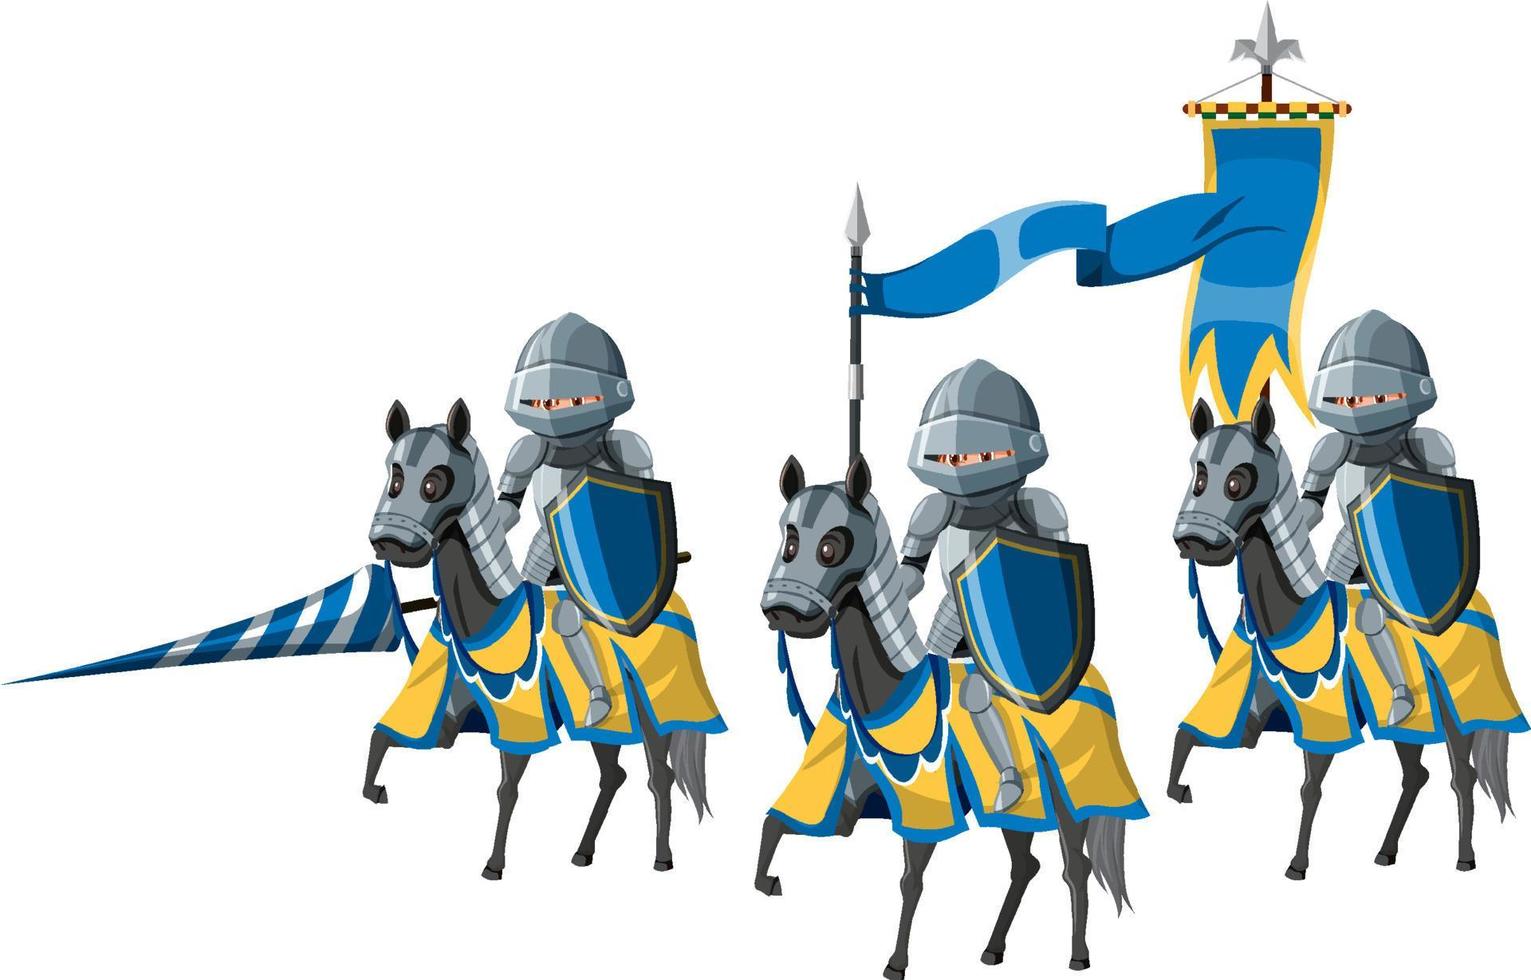 Group of medieval knights on horseback on white background vector